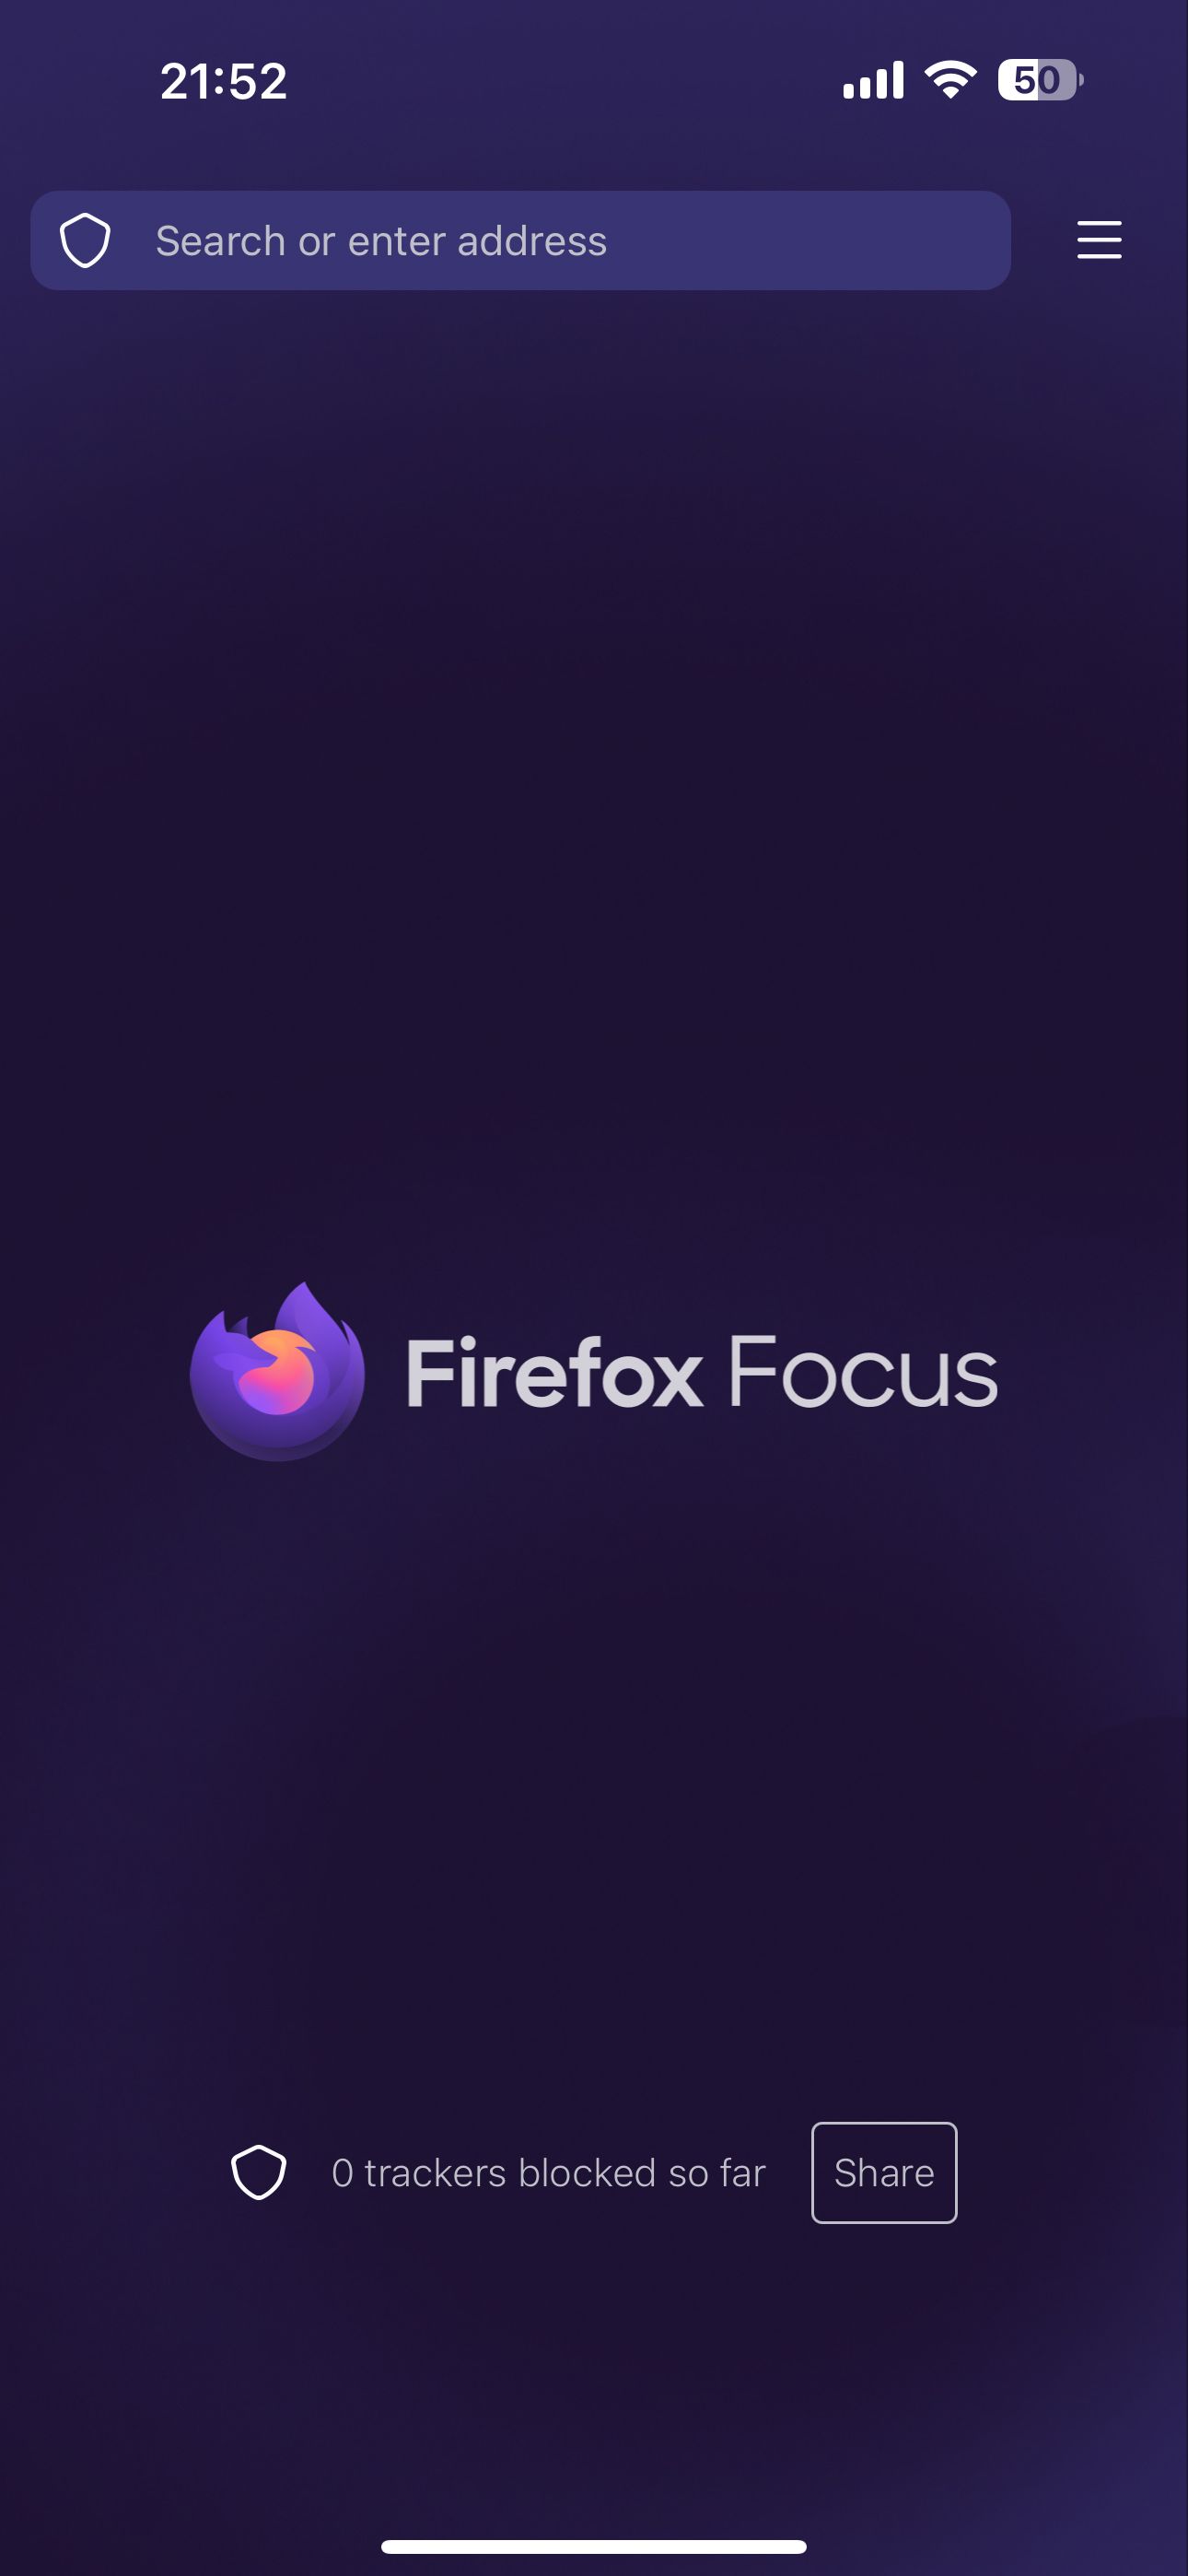 Firefox Focus home page